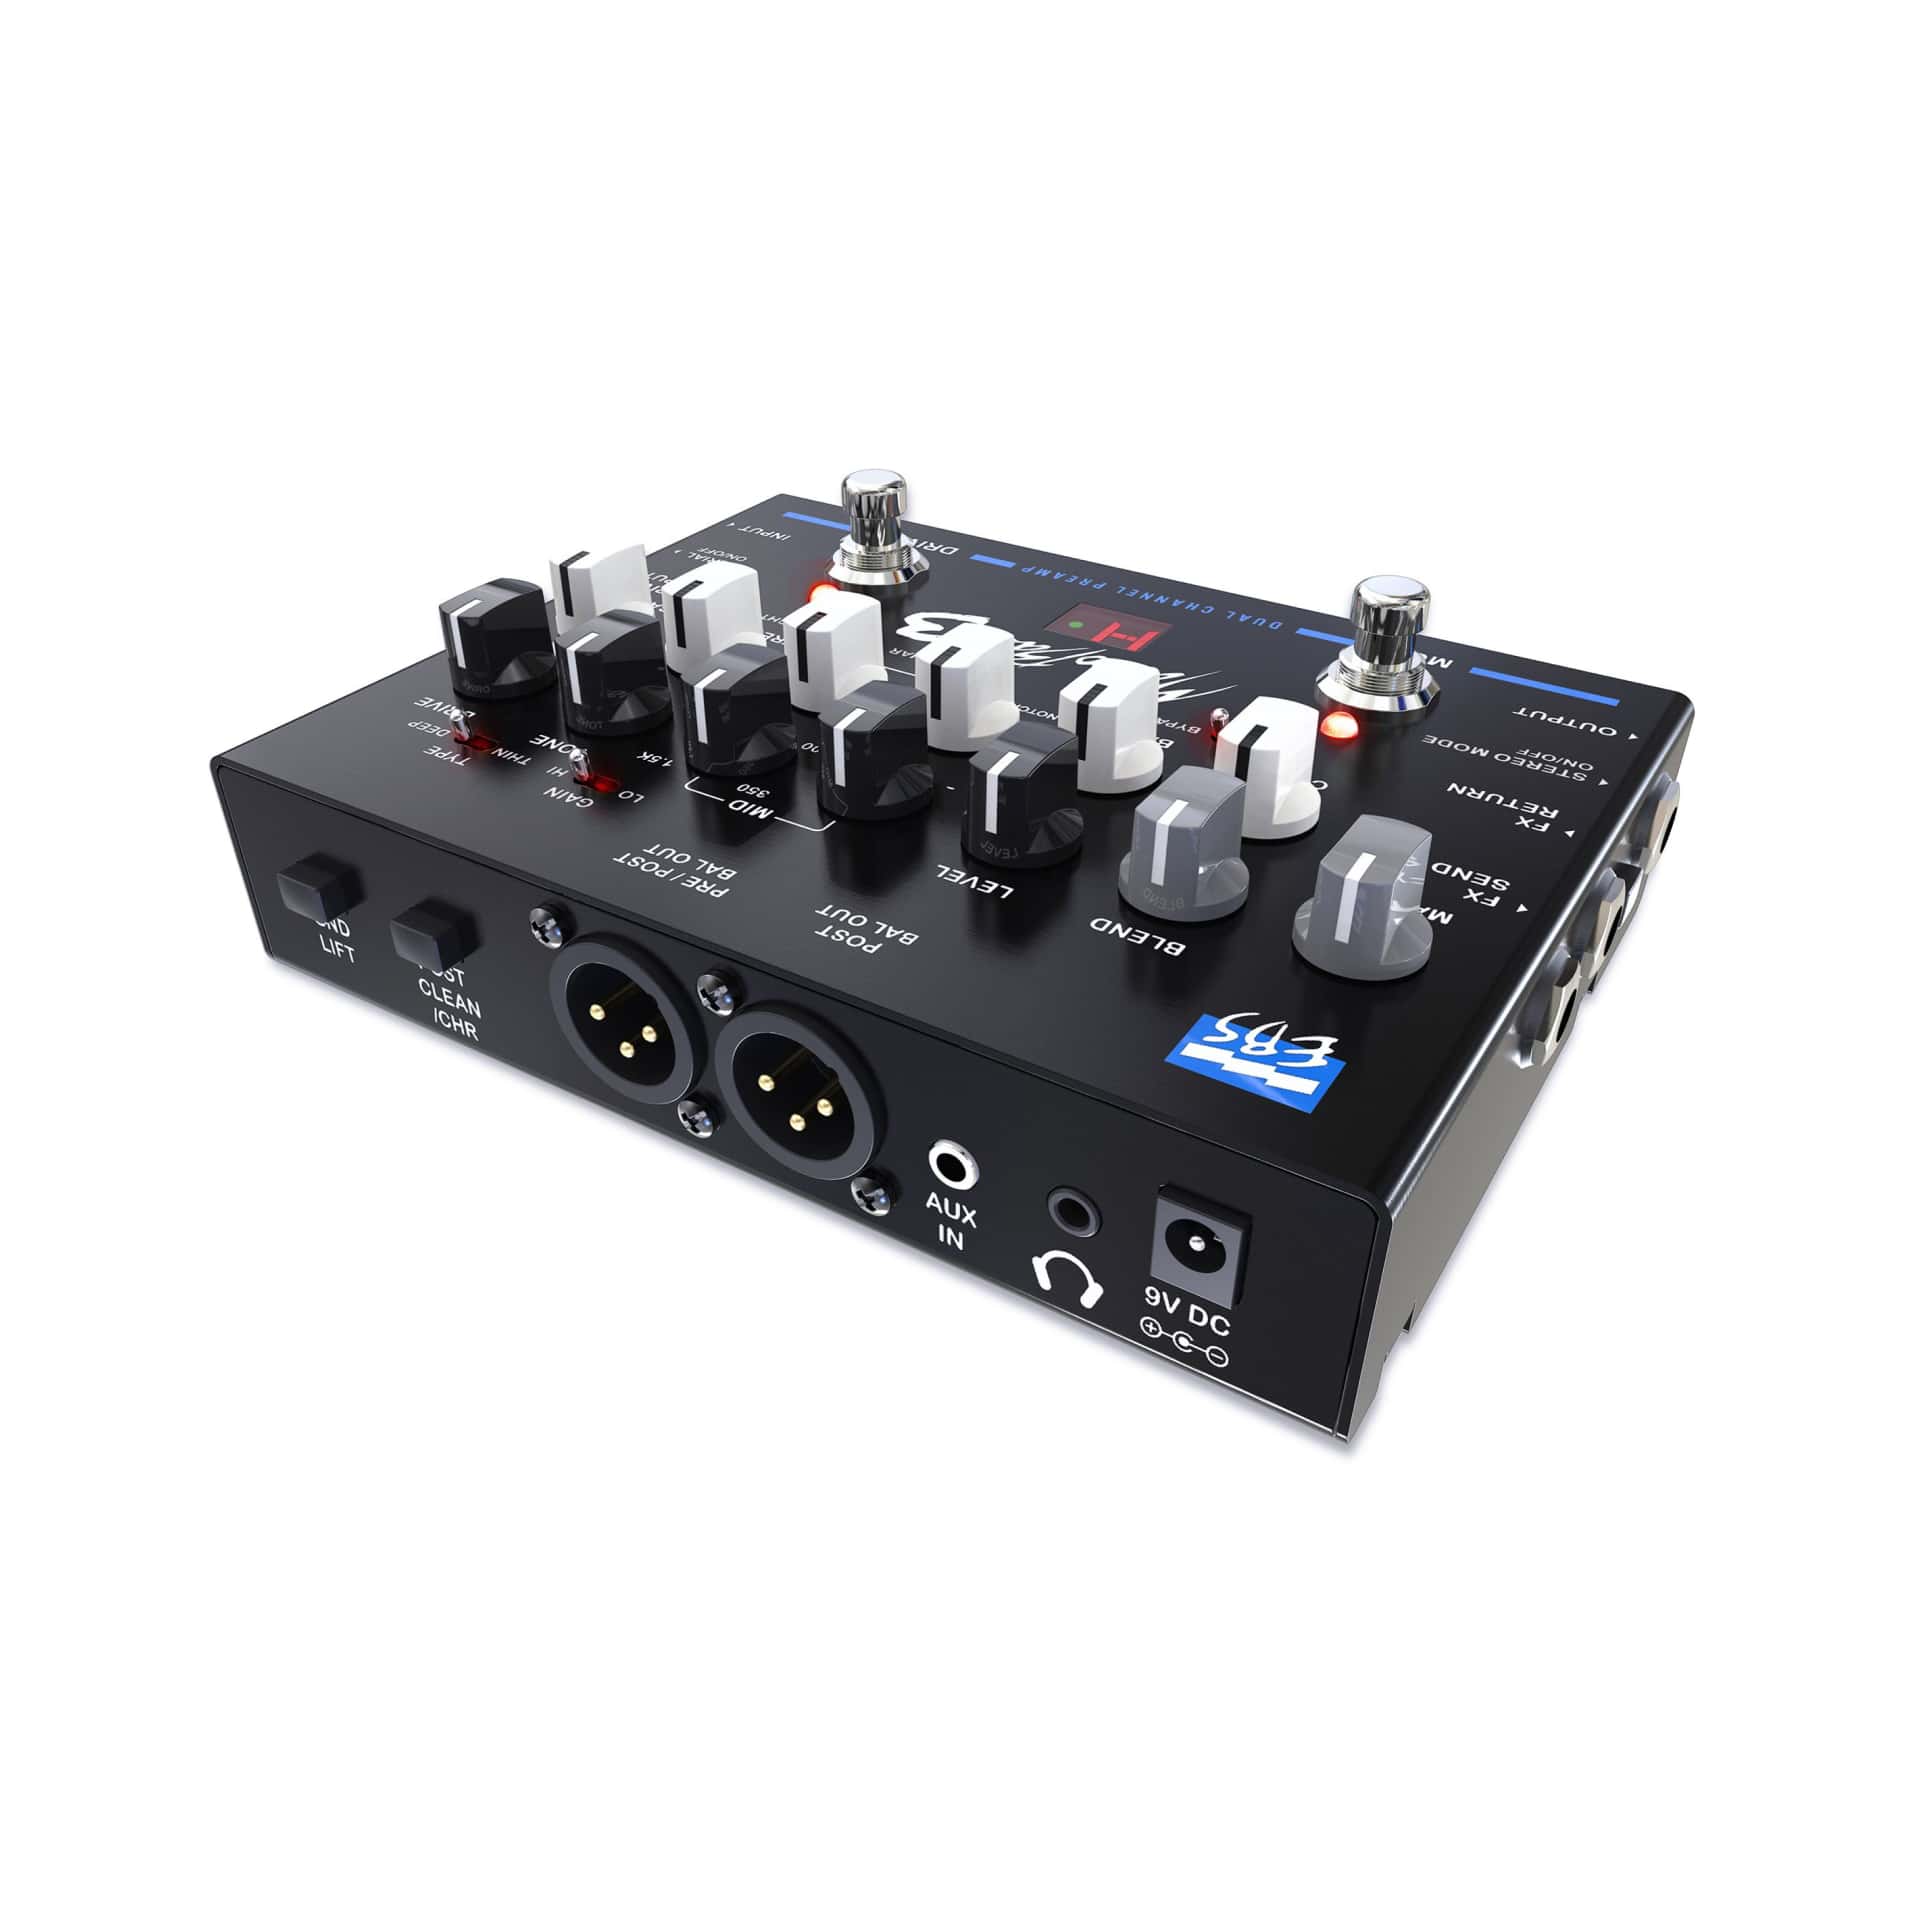 MicroBass 3 – Professional Outboard Preamp B-Stock